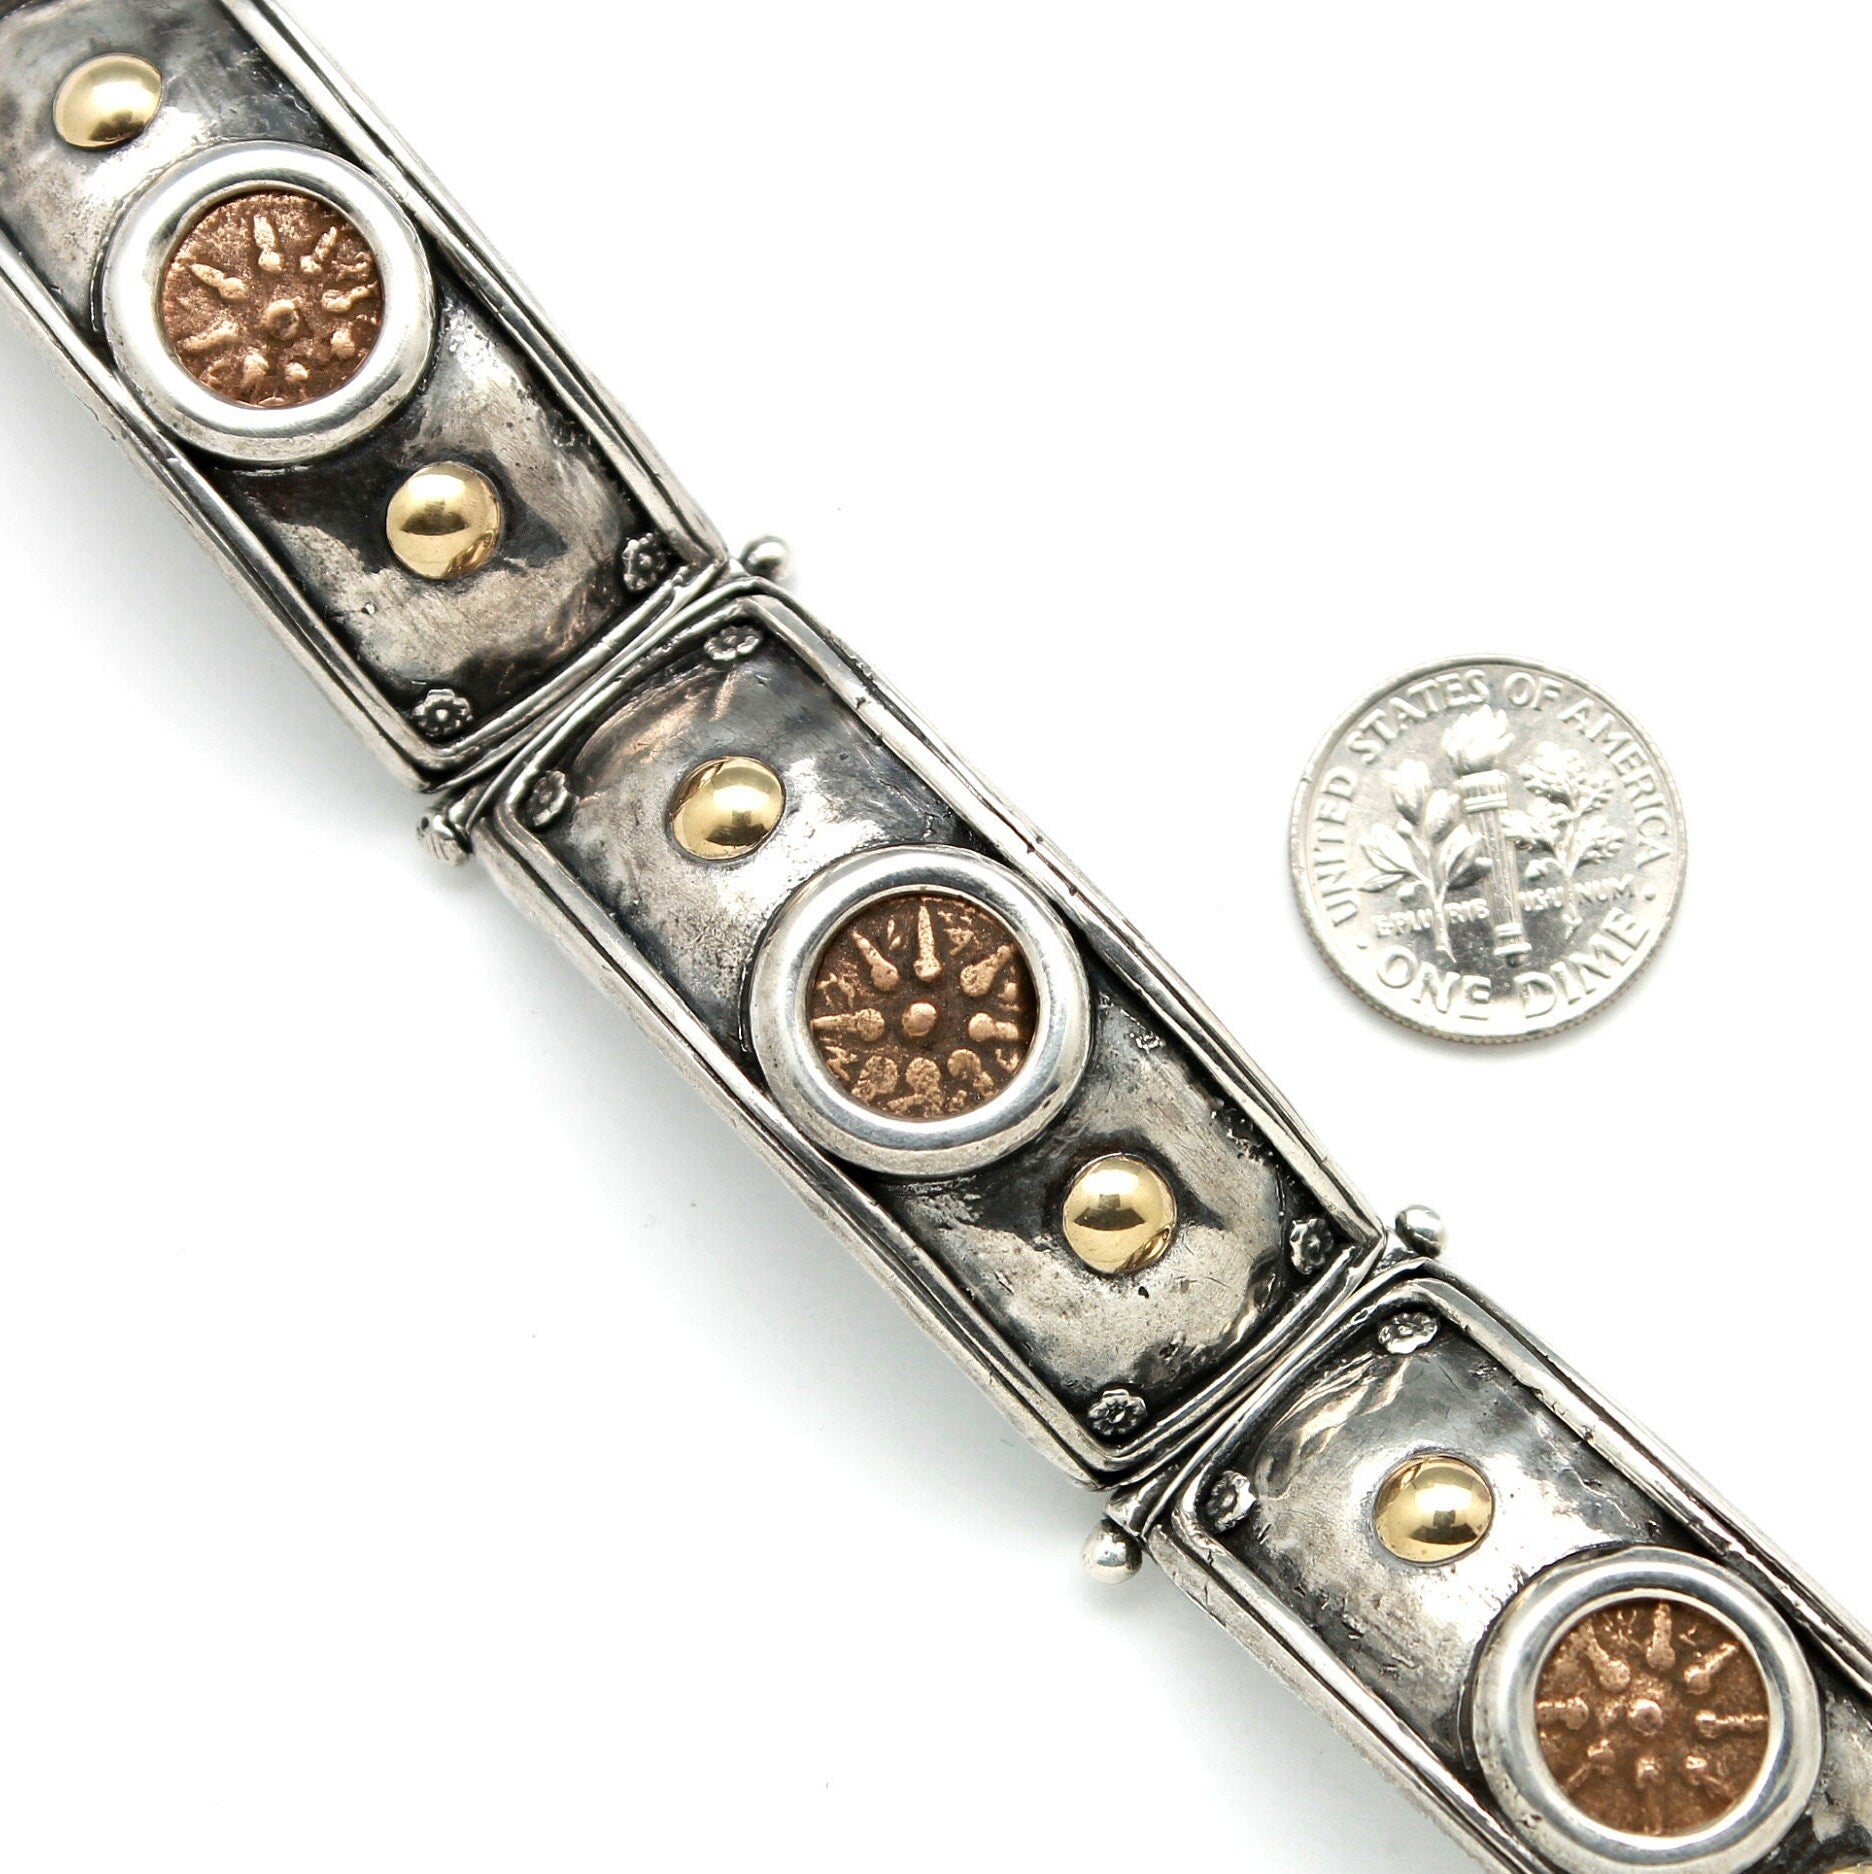 18K Gold Accents, Sterling Silver Flat Bracelet, Widows Mite, Ancient Prutah Coins, 7276